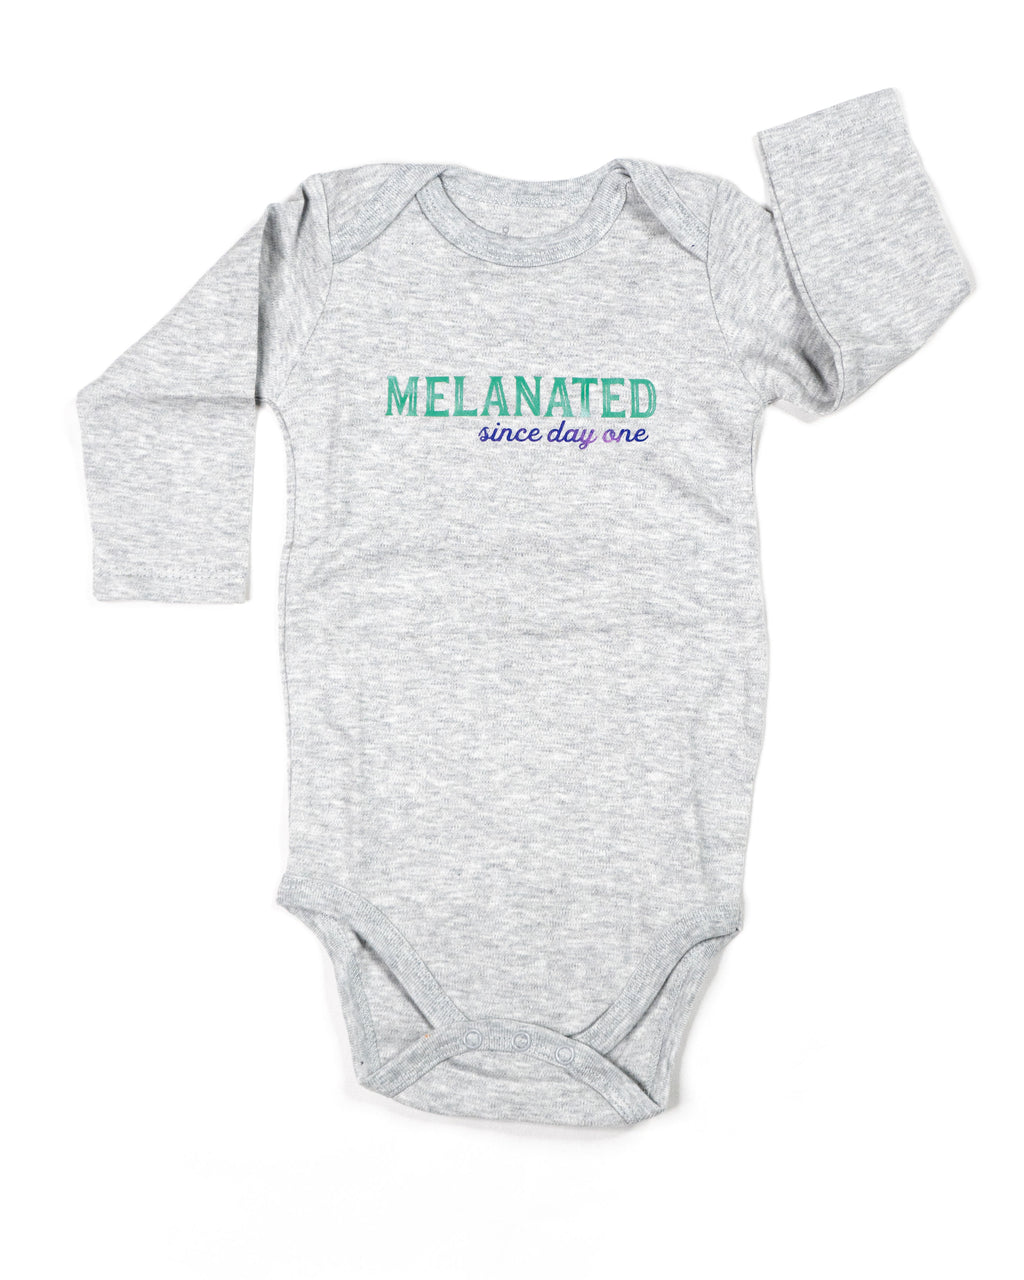 Melanated Since Day One long sleeve onesie